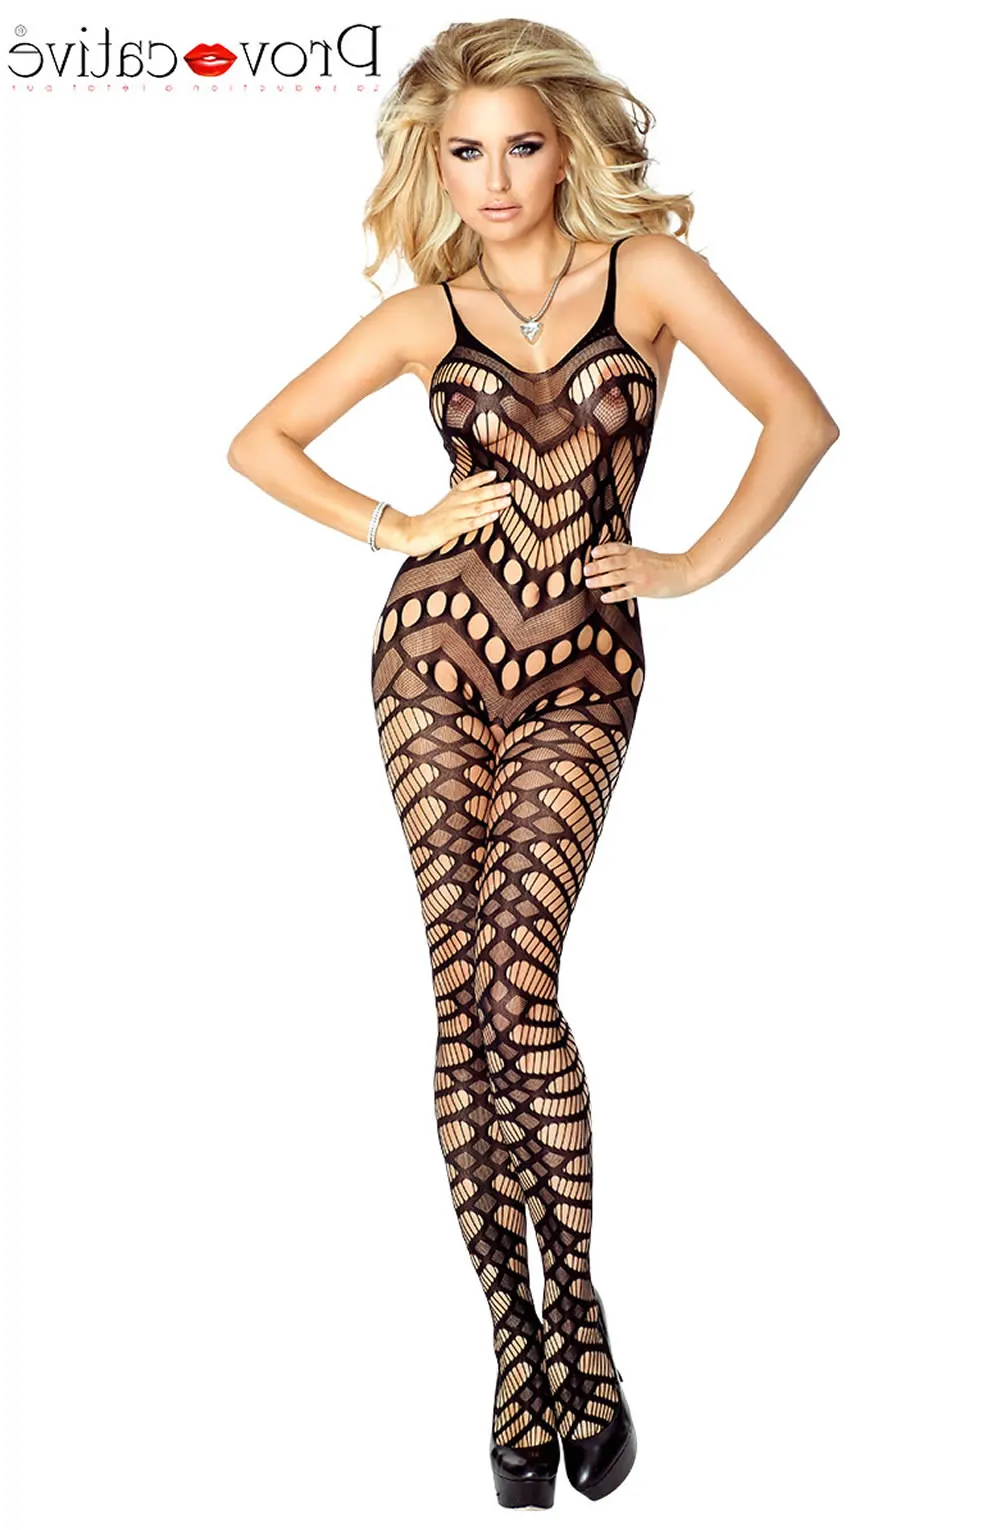 Provocative Bodystocking - Black Lingerie - Thin Straps - Intricate Pattern